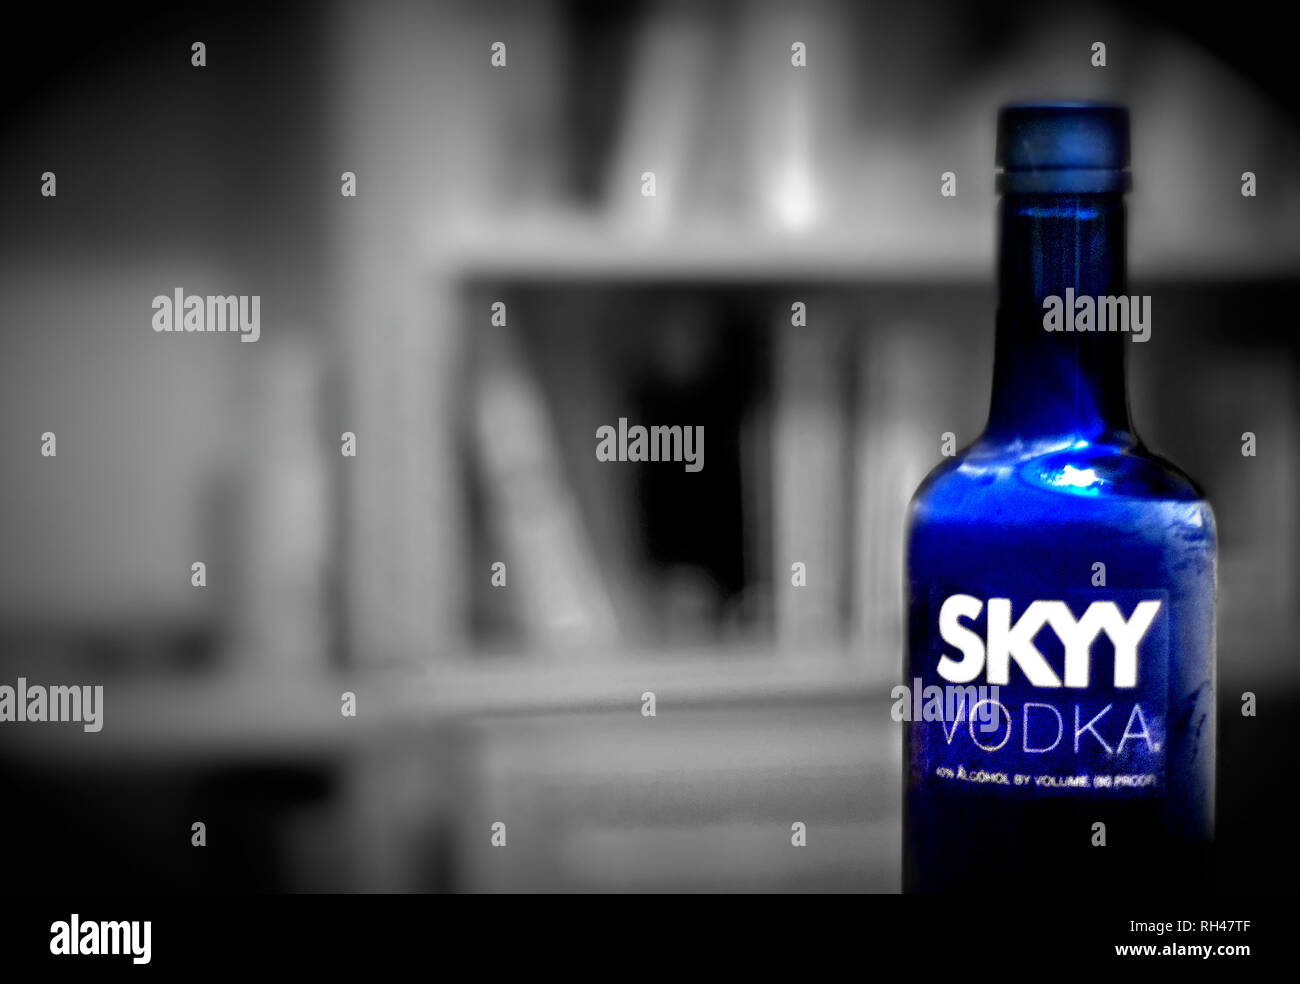 A blue bottle of Skyy vodka is set against a black and white backdrop of books, Jan. 28, 2010, in Northport, Alabama. Stock Photo